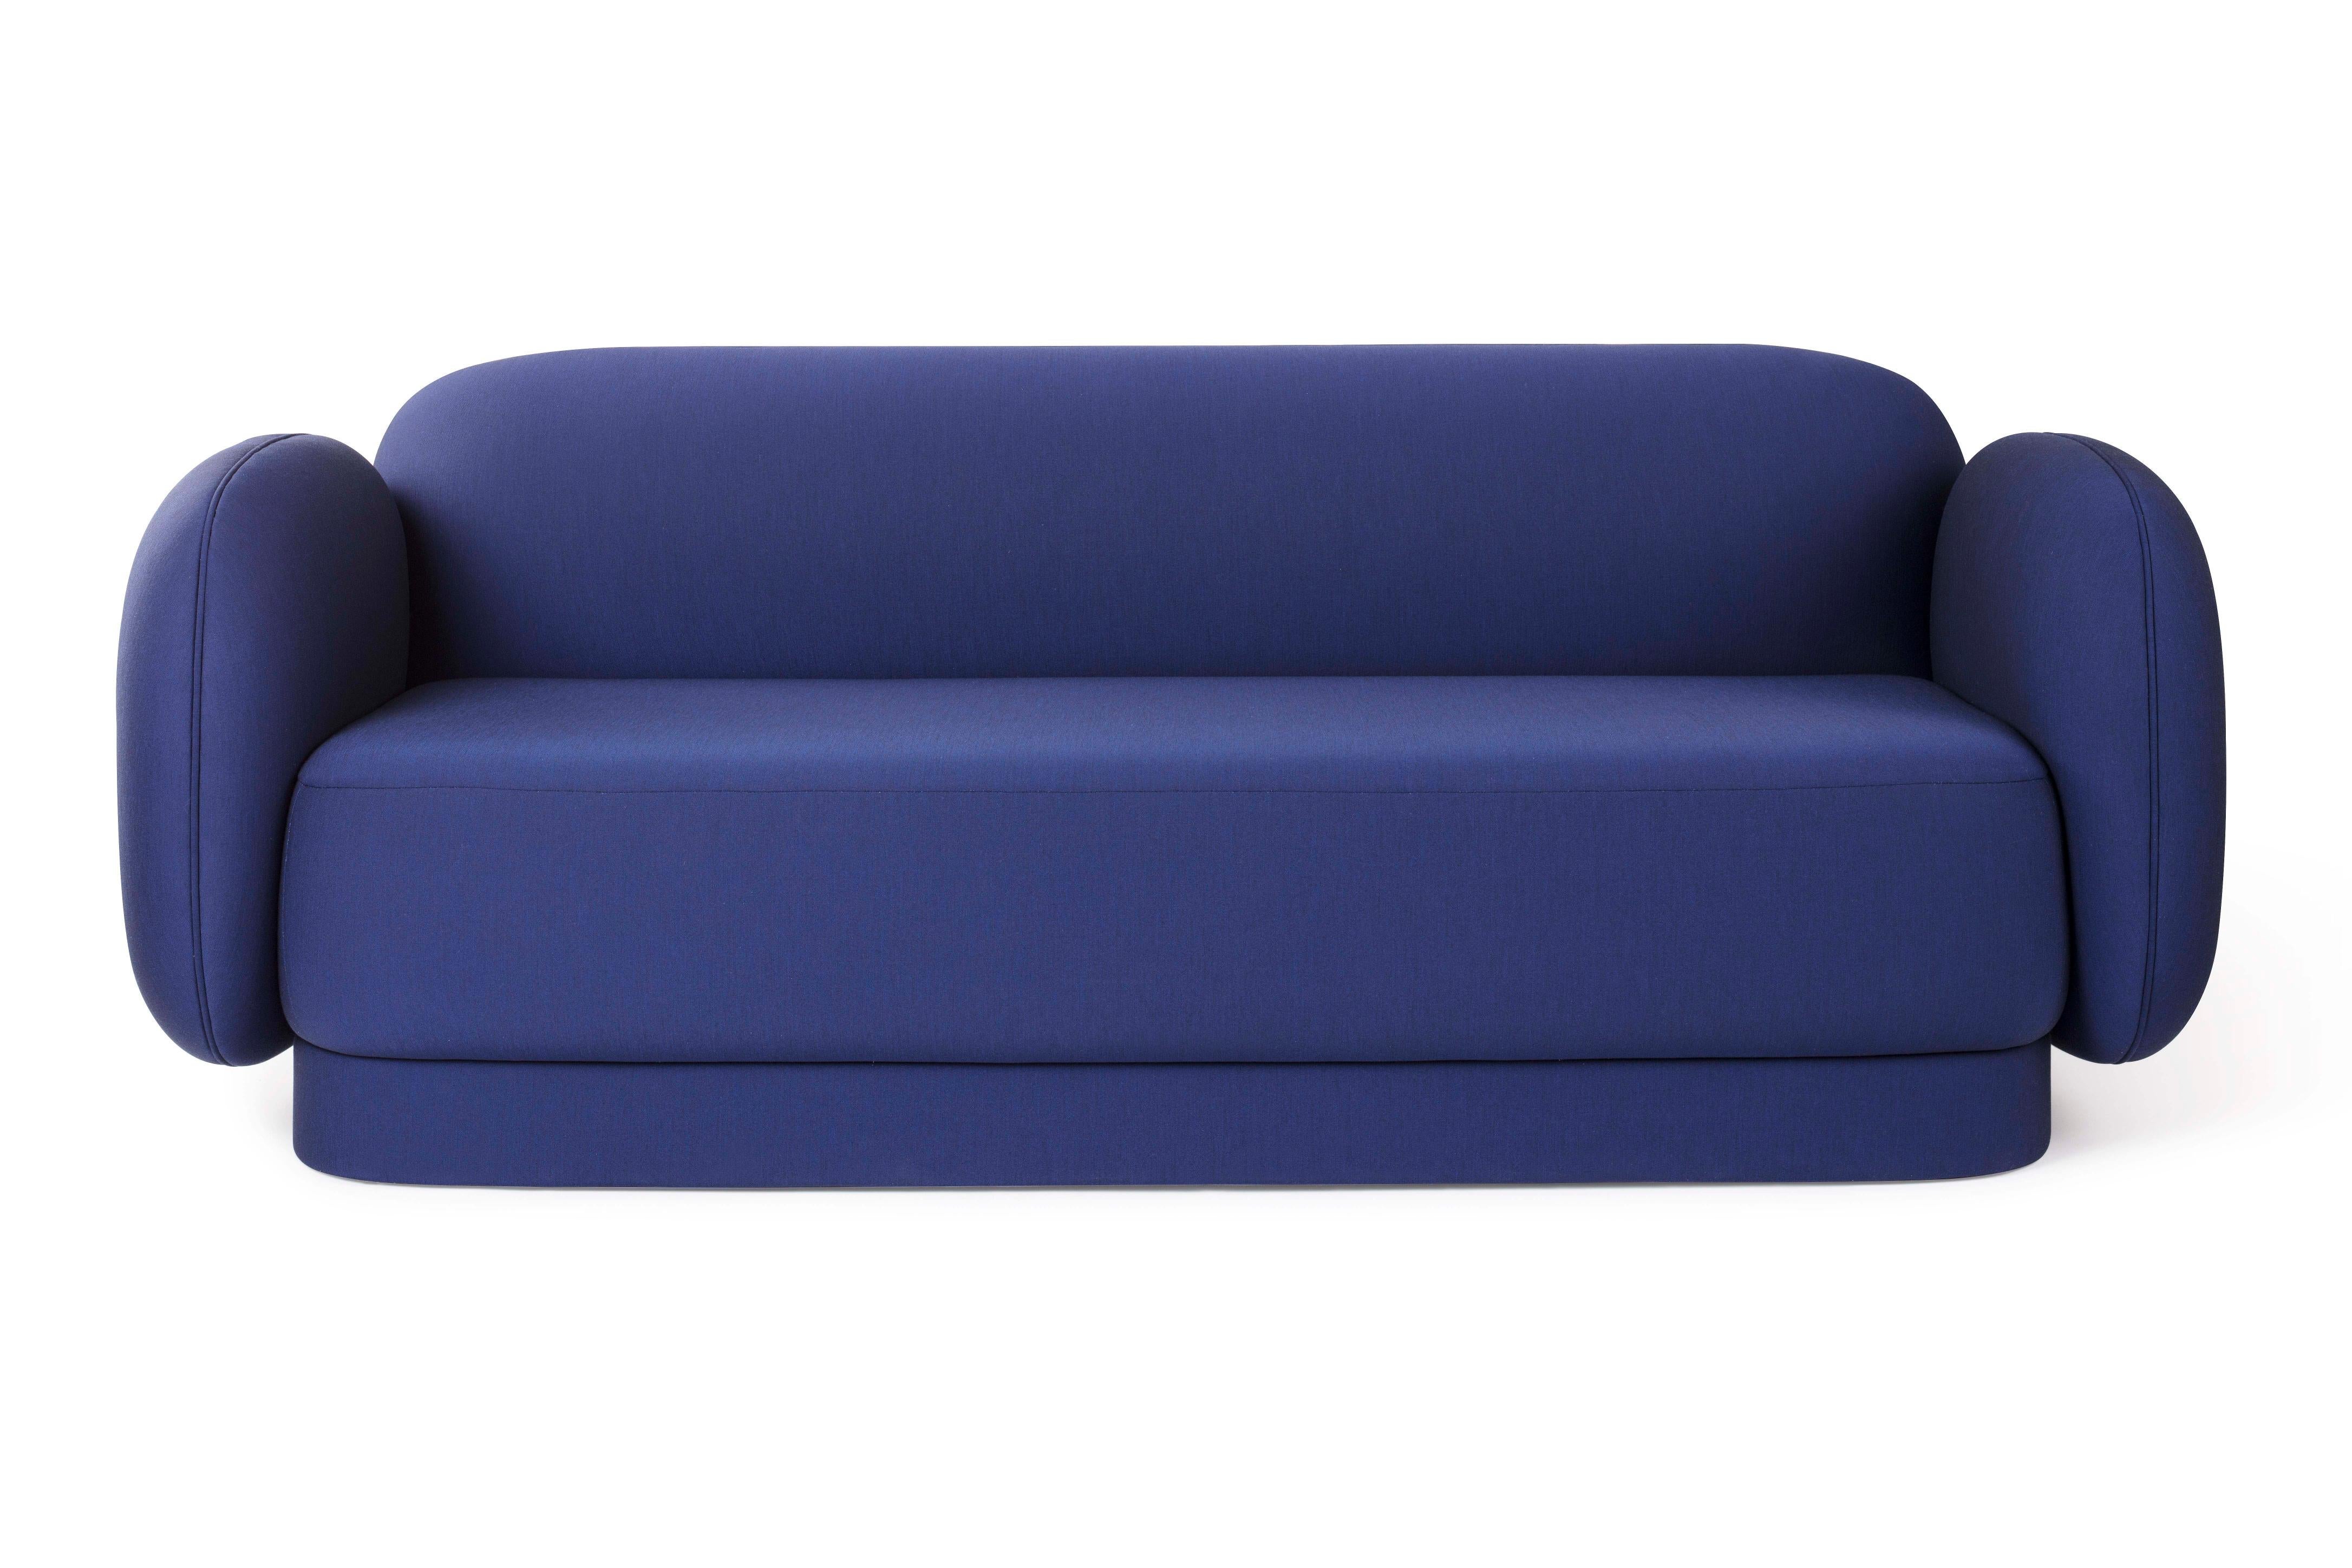 Space oddity sofa designed by Thomas Dariel, Maison Dada
Sofa: L240 x D100 x H95 cm
Structure in solid timber and plywood • Memory foam
Base and seating fully upholstered in fabric
Recommended fabric • Febrik Uniform Melange Collection from